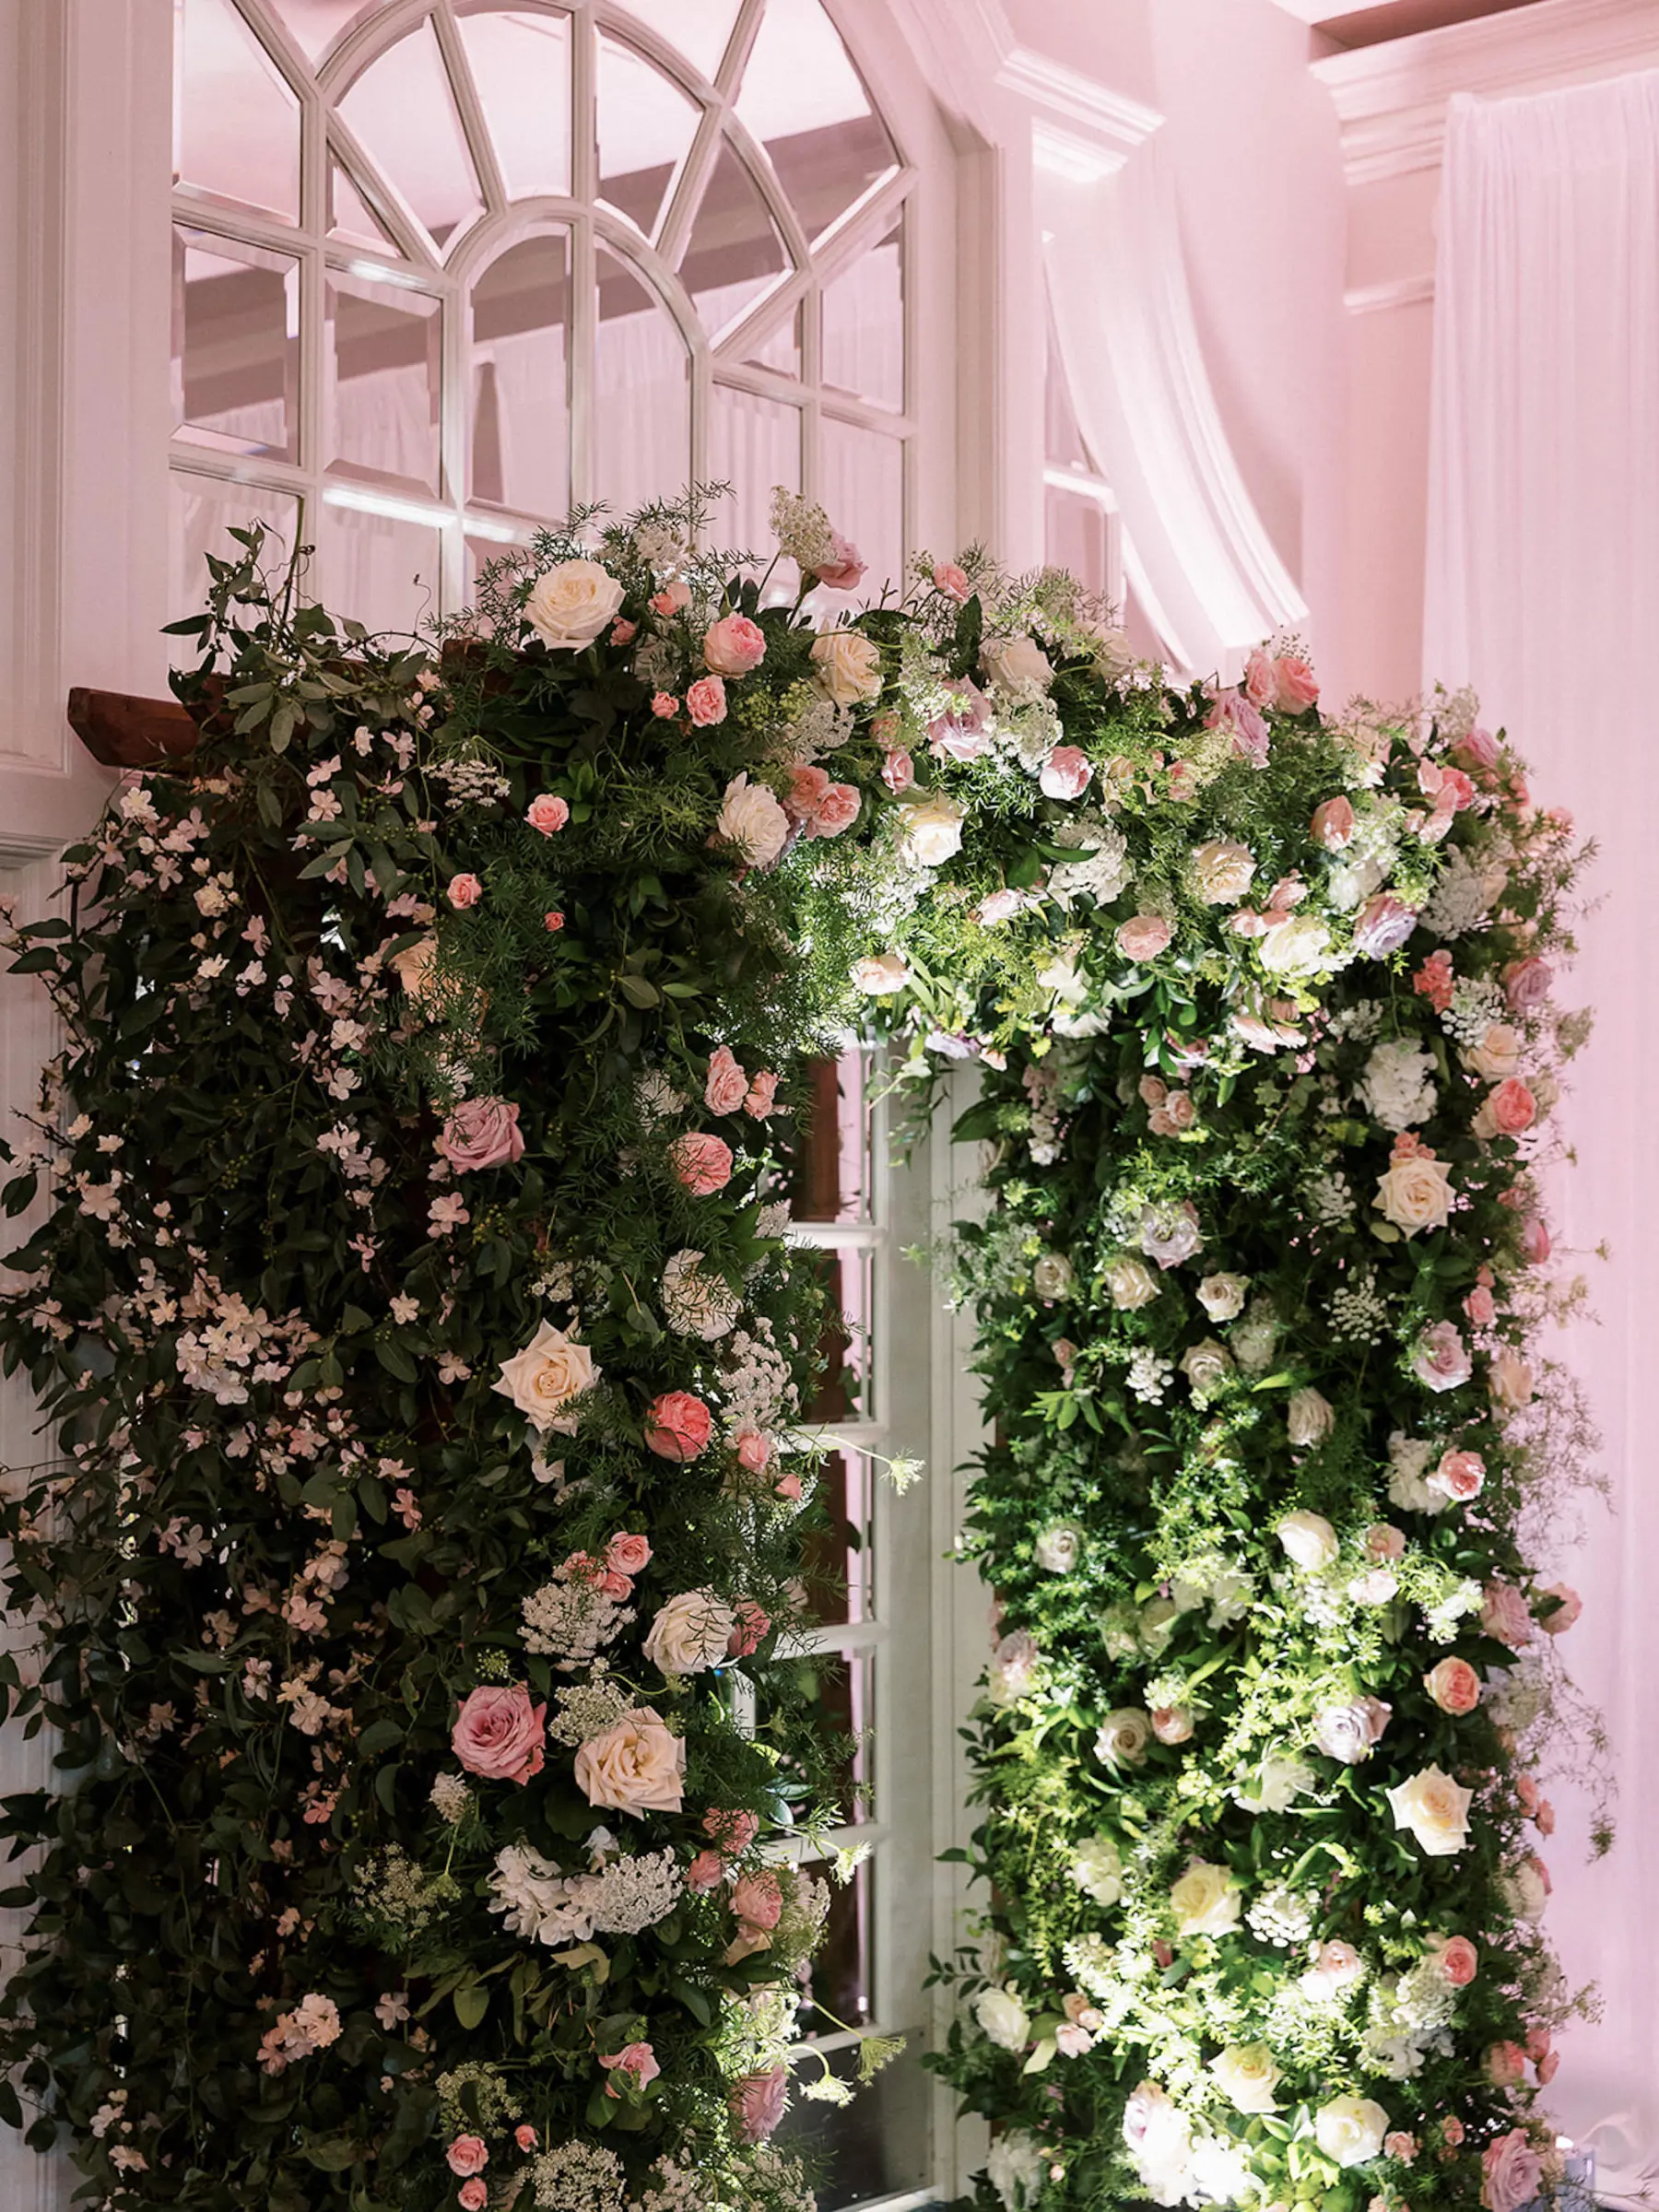 Whimsical Wedding Reception Entrance Arch Decor Ideas | White and Pink Roses, Greenery Floral Arrangement Inspiration